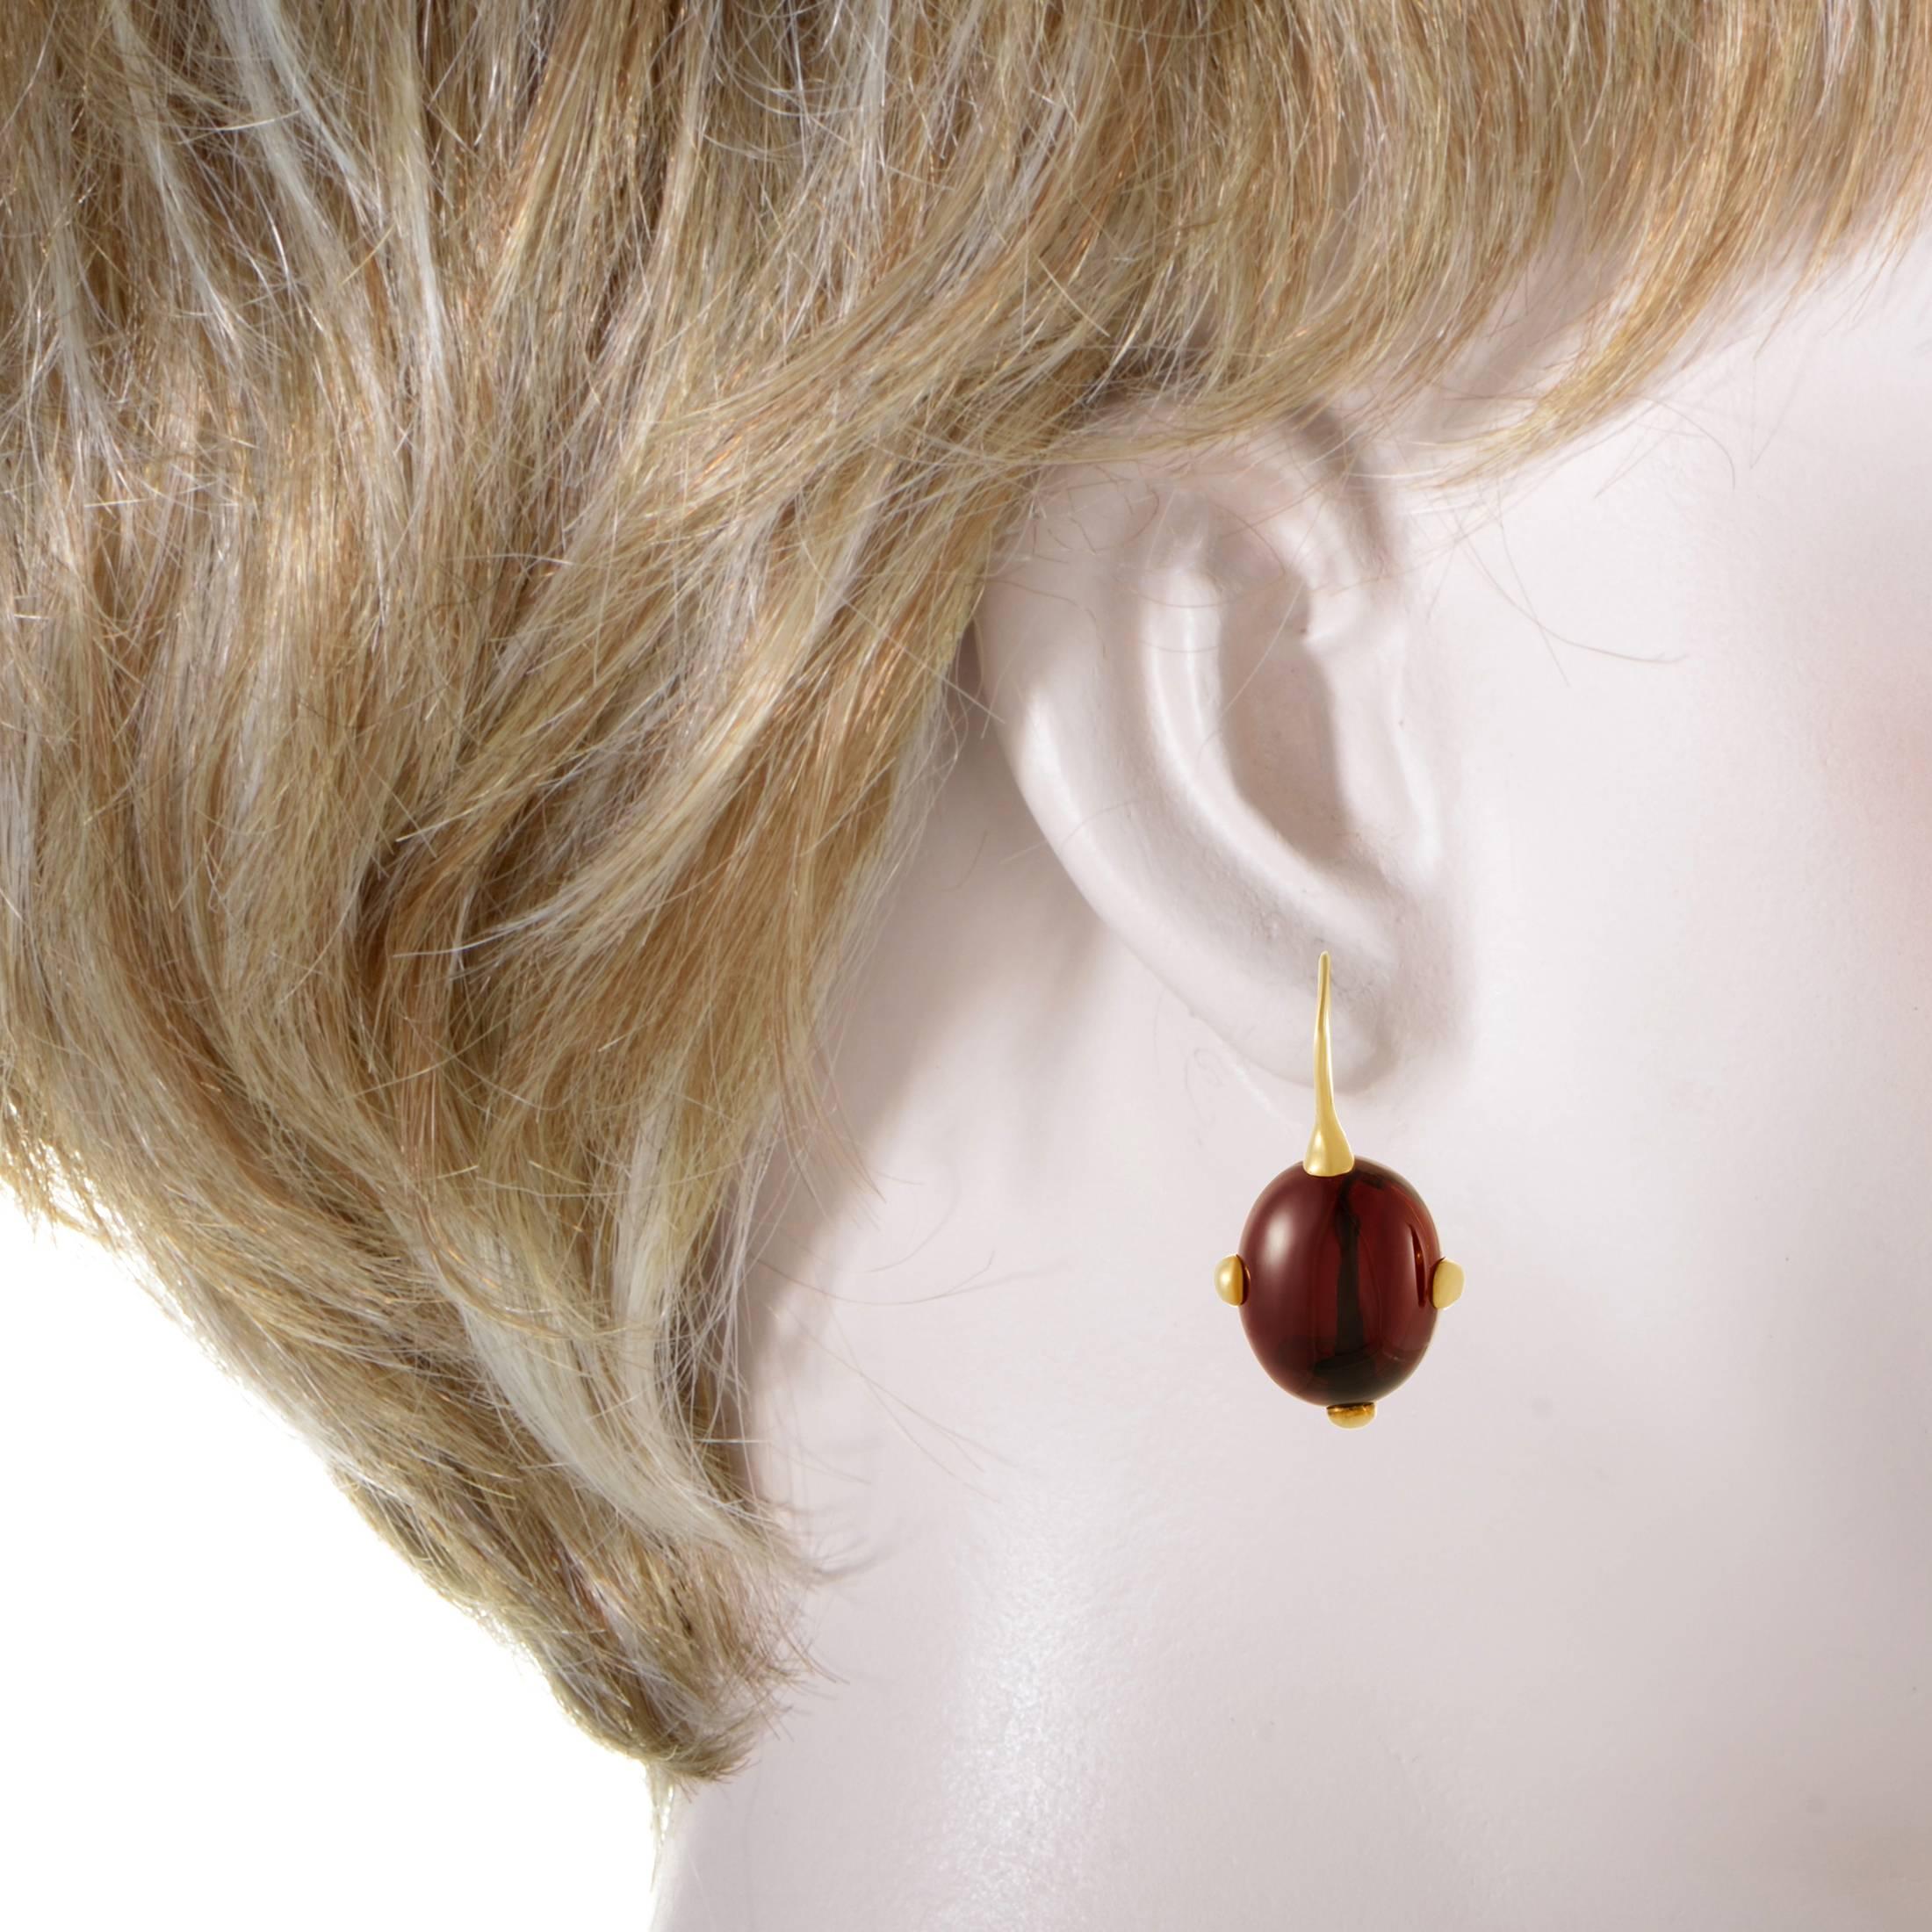 Exceptionally exuberant, slightly translucent and marvelously cut, the astounding garnet stones produce a fantastic allure in these fabulous earrings from Pomellato which are made of luxurious 18K yellow gold for a stylish overall tone.